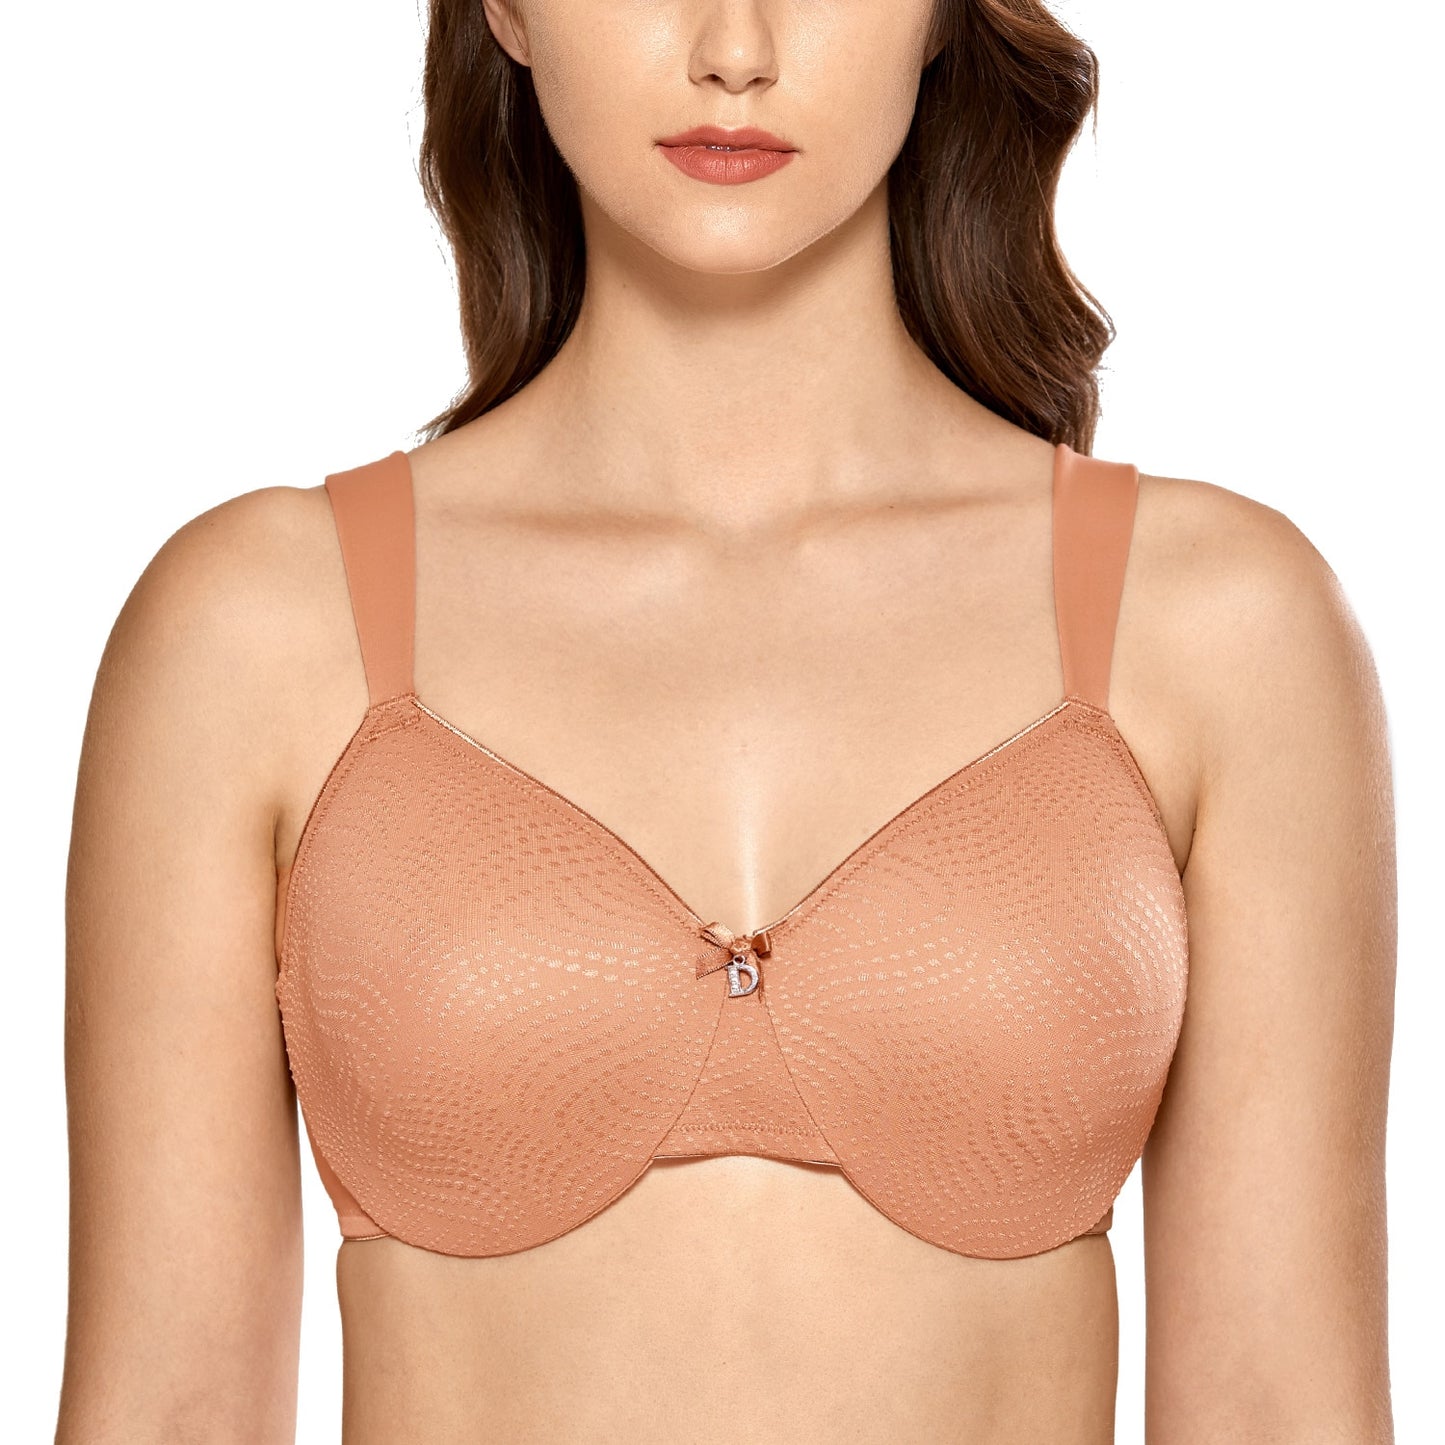 SS Online Trading - SSHK Shop - Plus size full cup sheer minimizer underwired bra